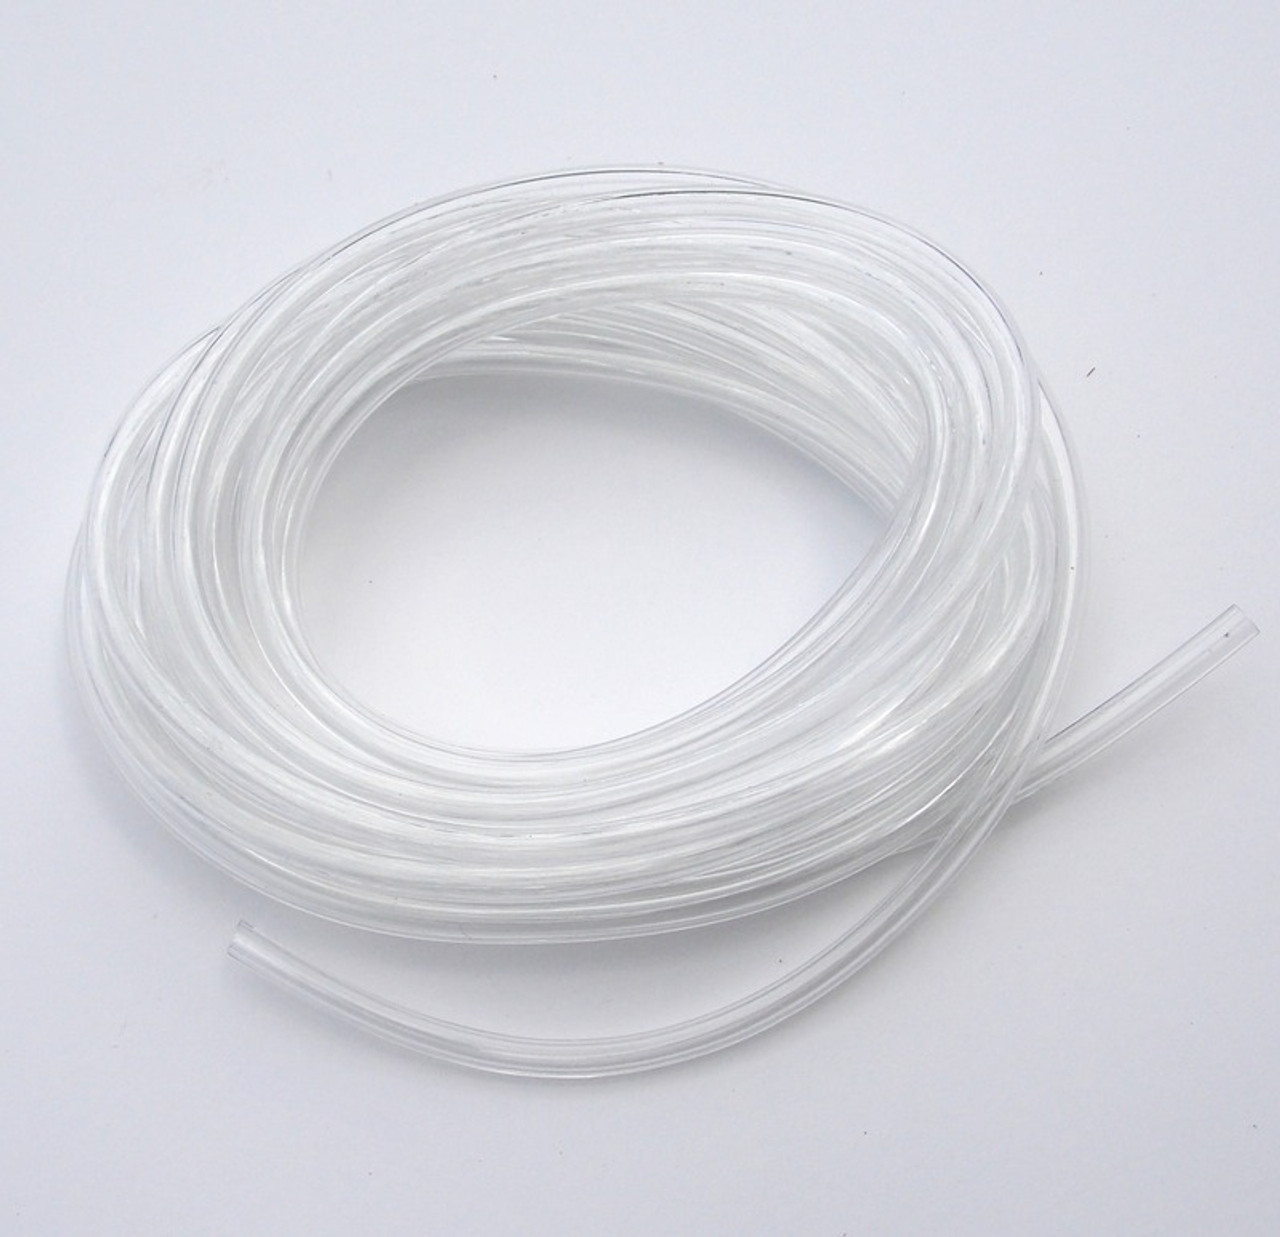 Clear Chafe tube loop protector10' length available in 1.4mm - 2.4